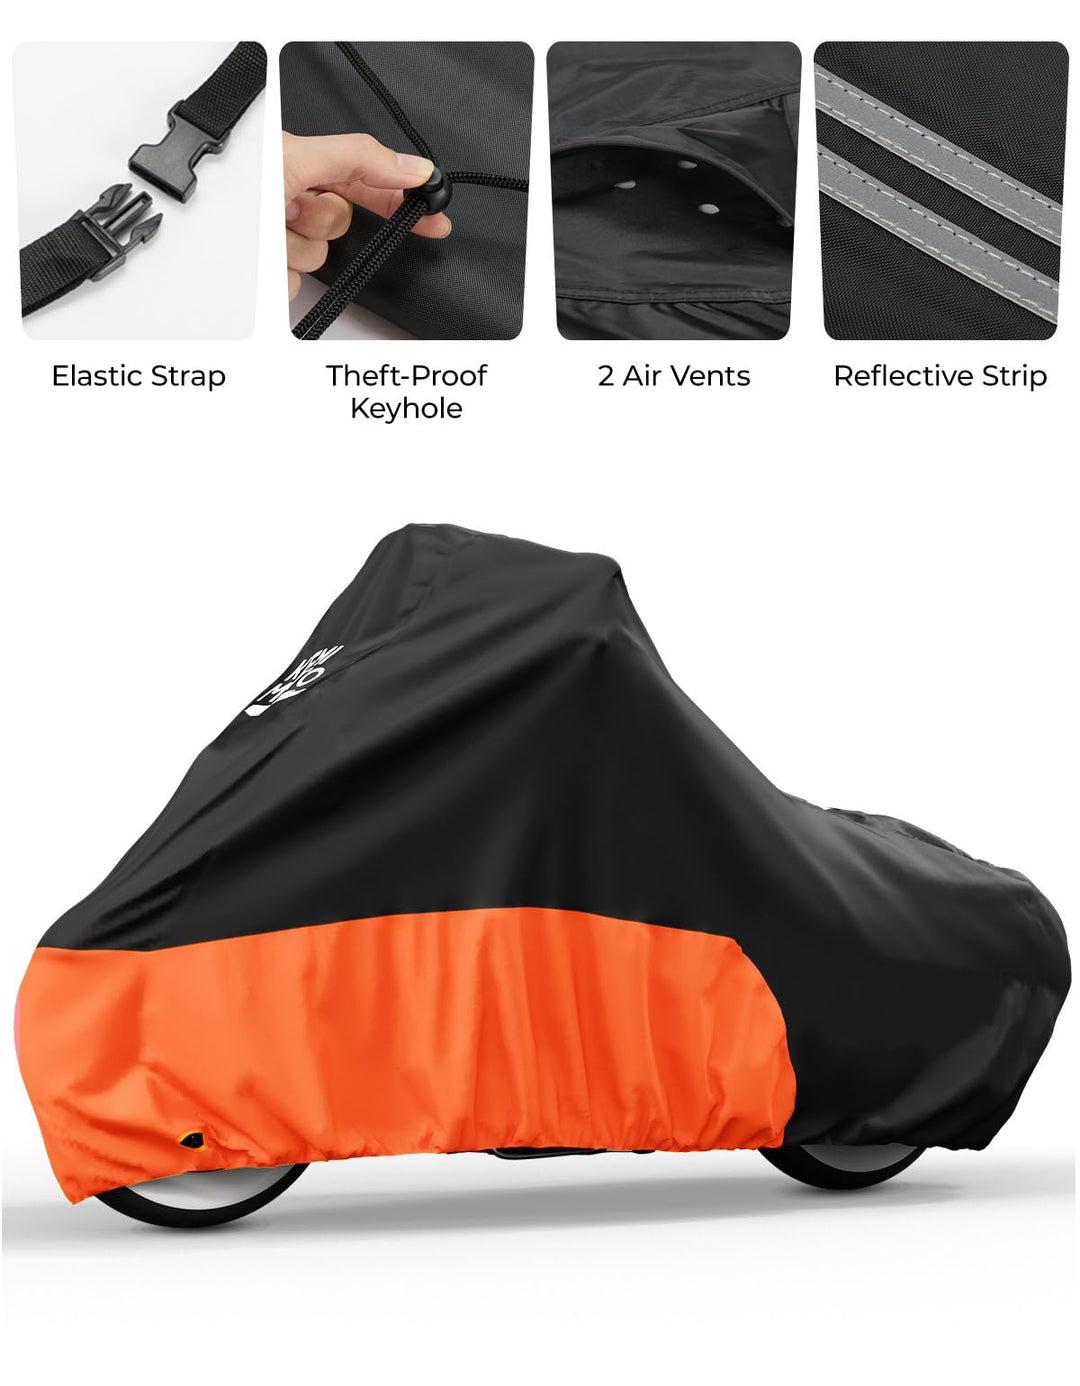 Motorcycle Cover for Softail Dyna Models - Kemimoto